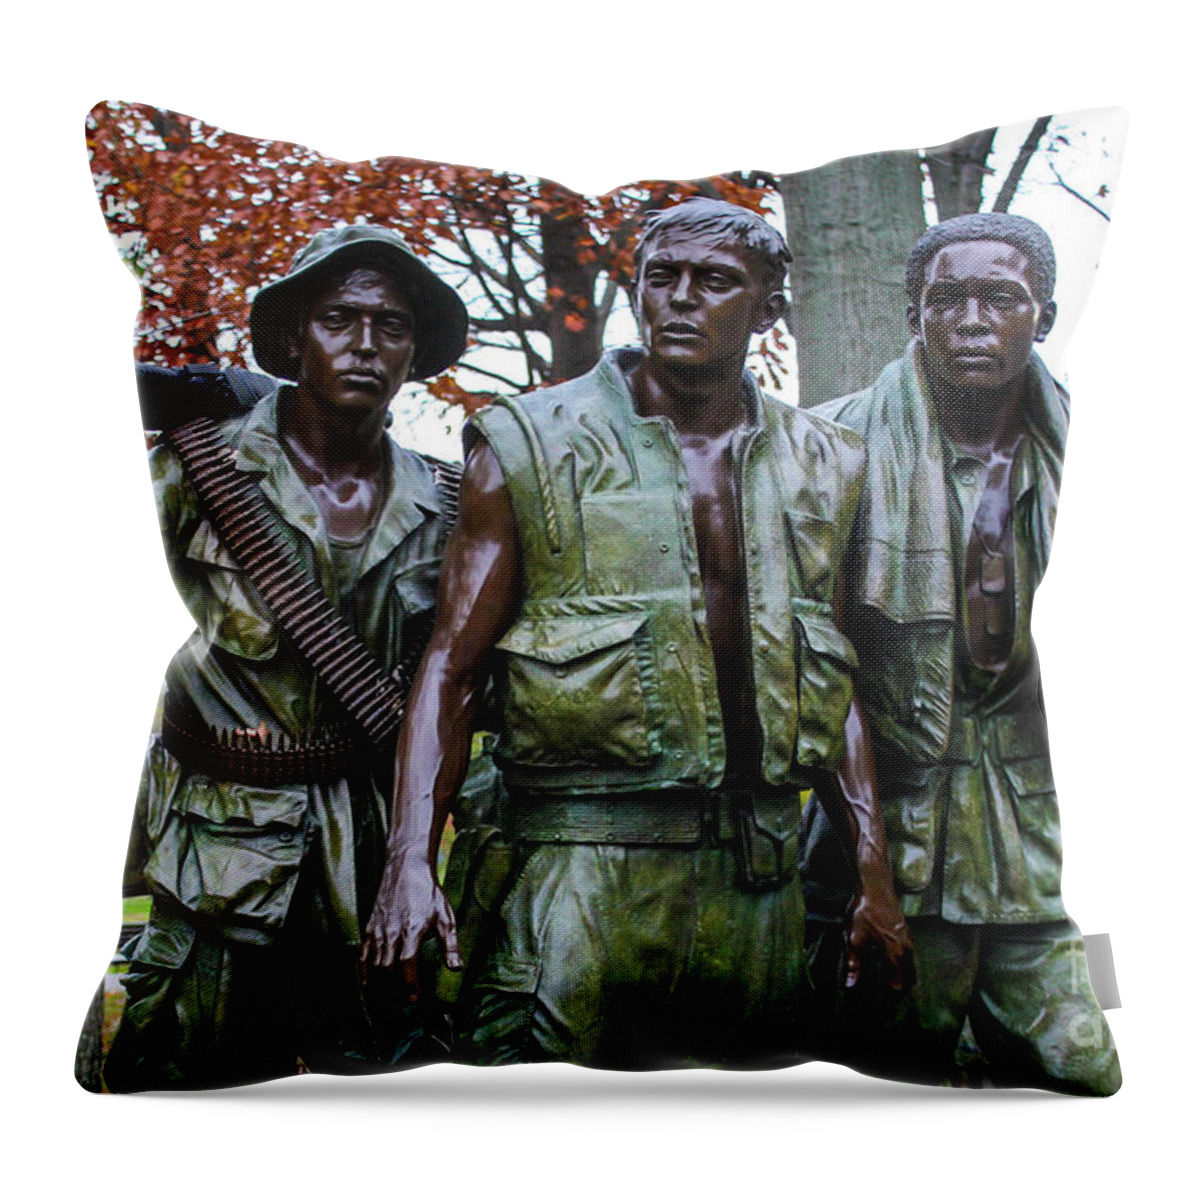 This Is A Photo Of The Three Soldiers In Washington D.c. Dedicated To The Soldiers Of The Vietnam War. This Well-known Sculpture By Frederick Hart Portrays Three Young Uniformed American Soldiers. While The Military Attire Is Meant To Be Symbolic And General In Nature Throw Pillow featuring the photograph The Three Soldiers #1 by Bill Rogers